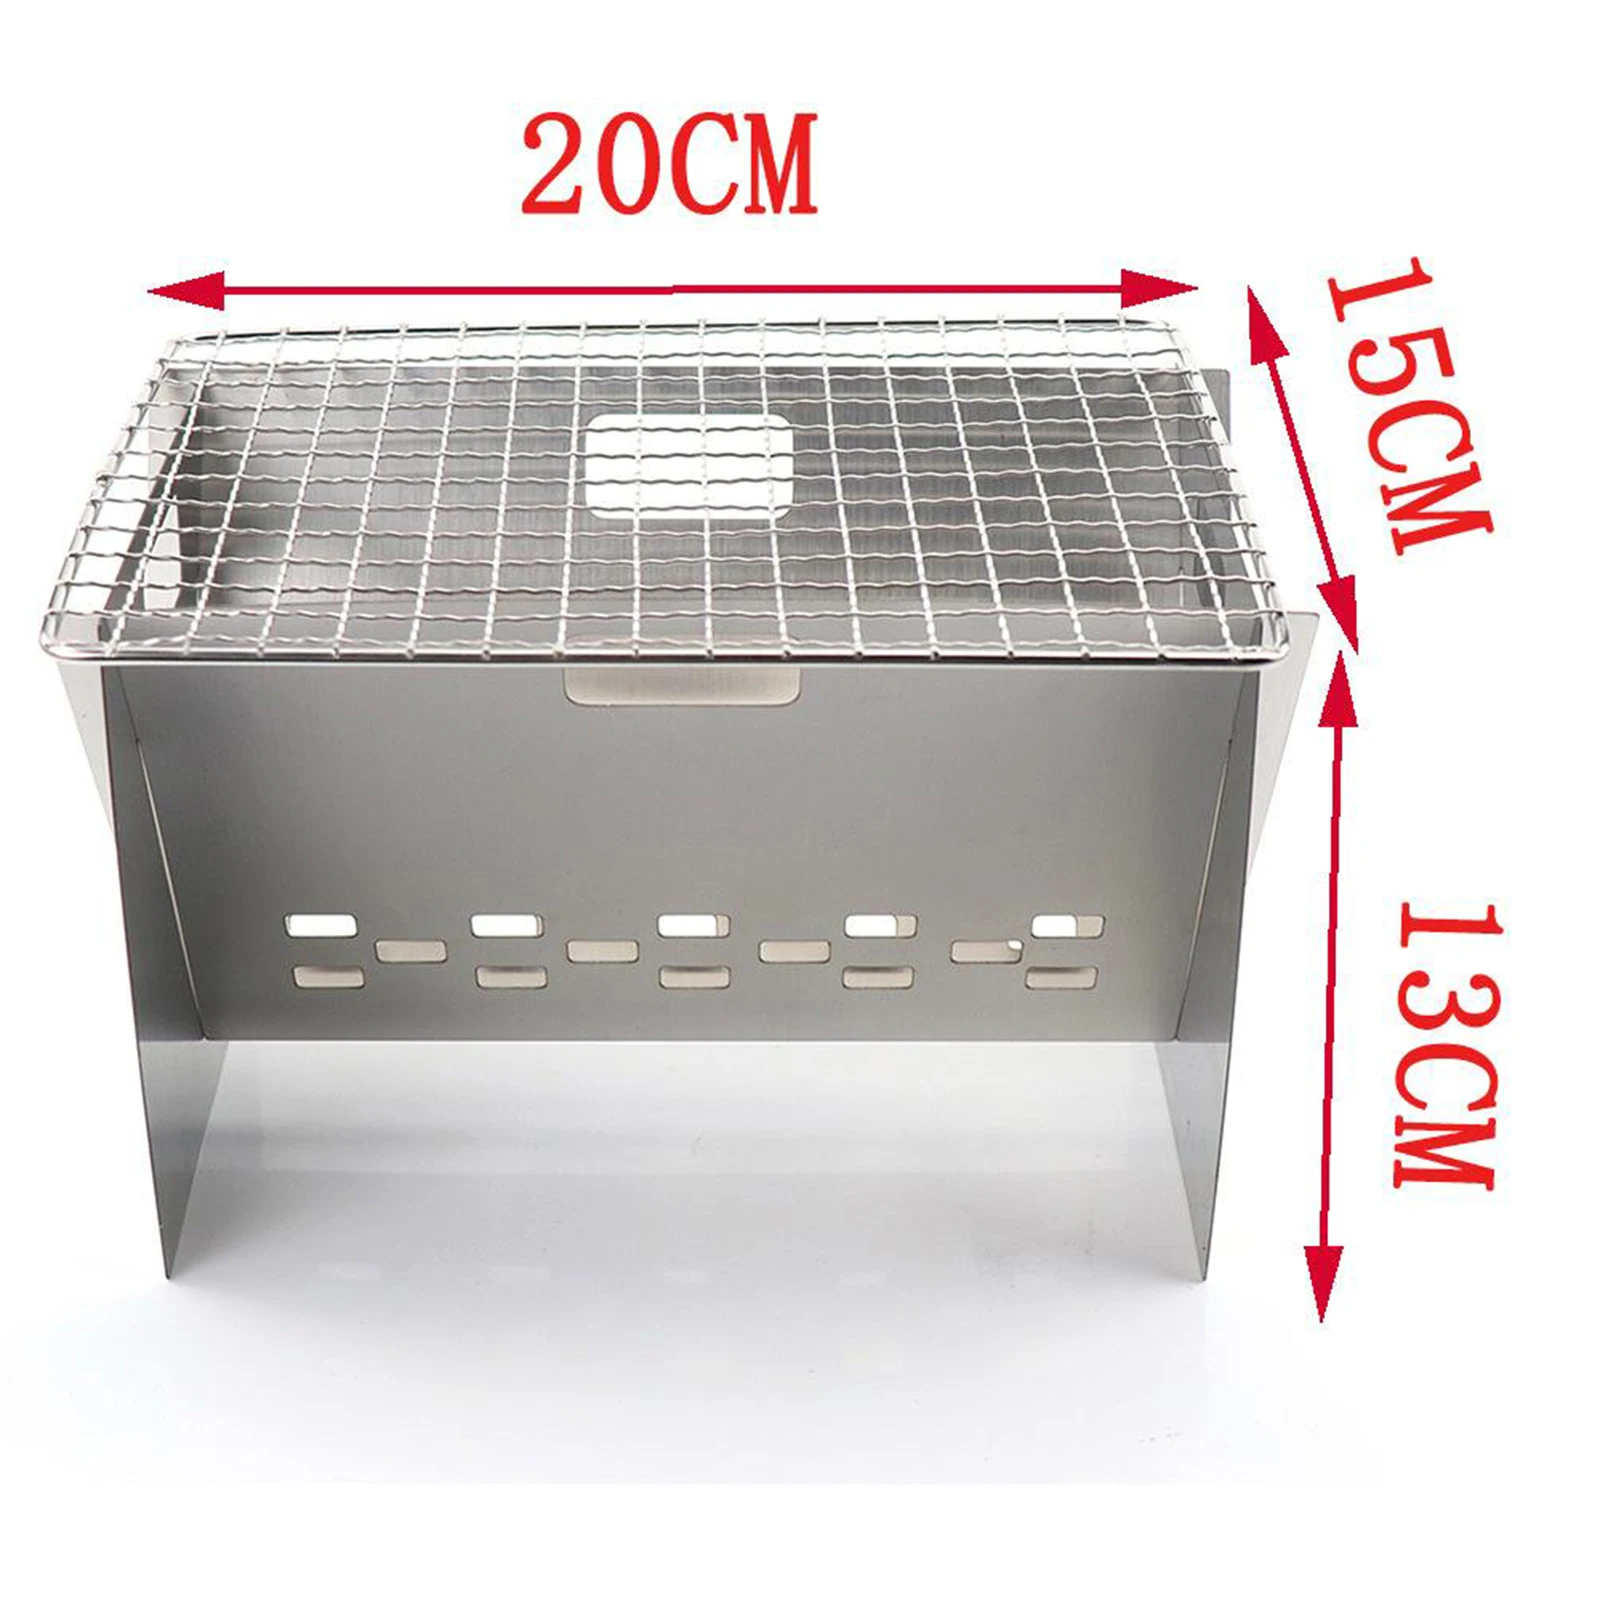 Outdoor Folding Camping Grill Wood Burning Stove for Camping Backpacking BBQ Barbecue Picnic